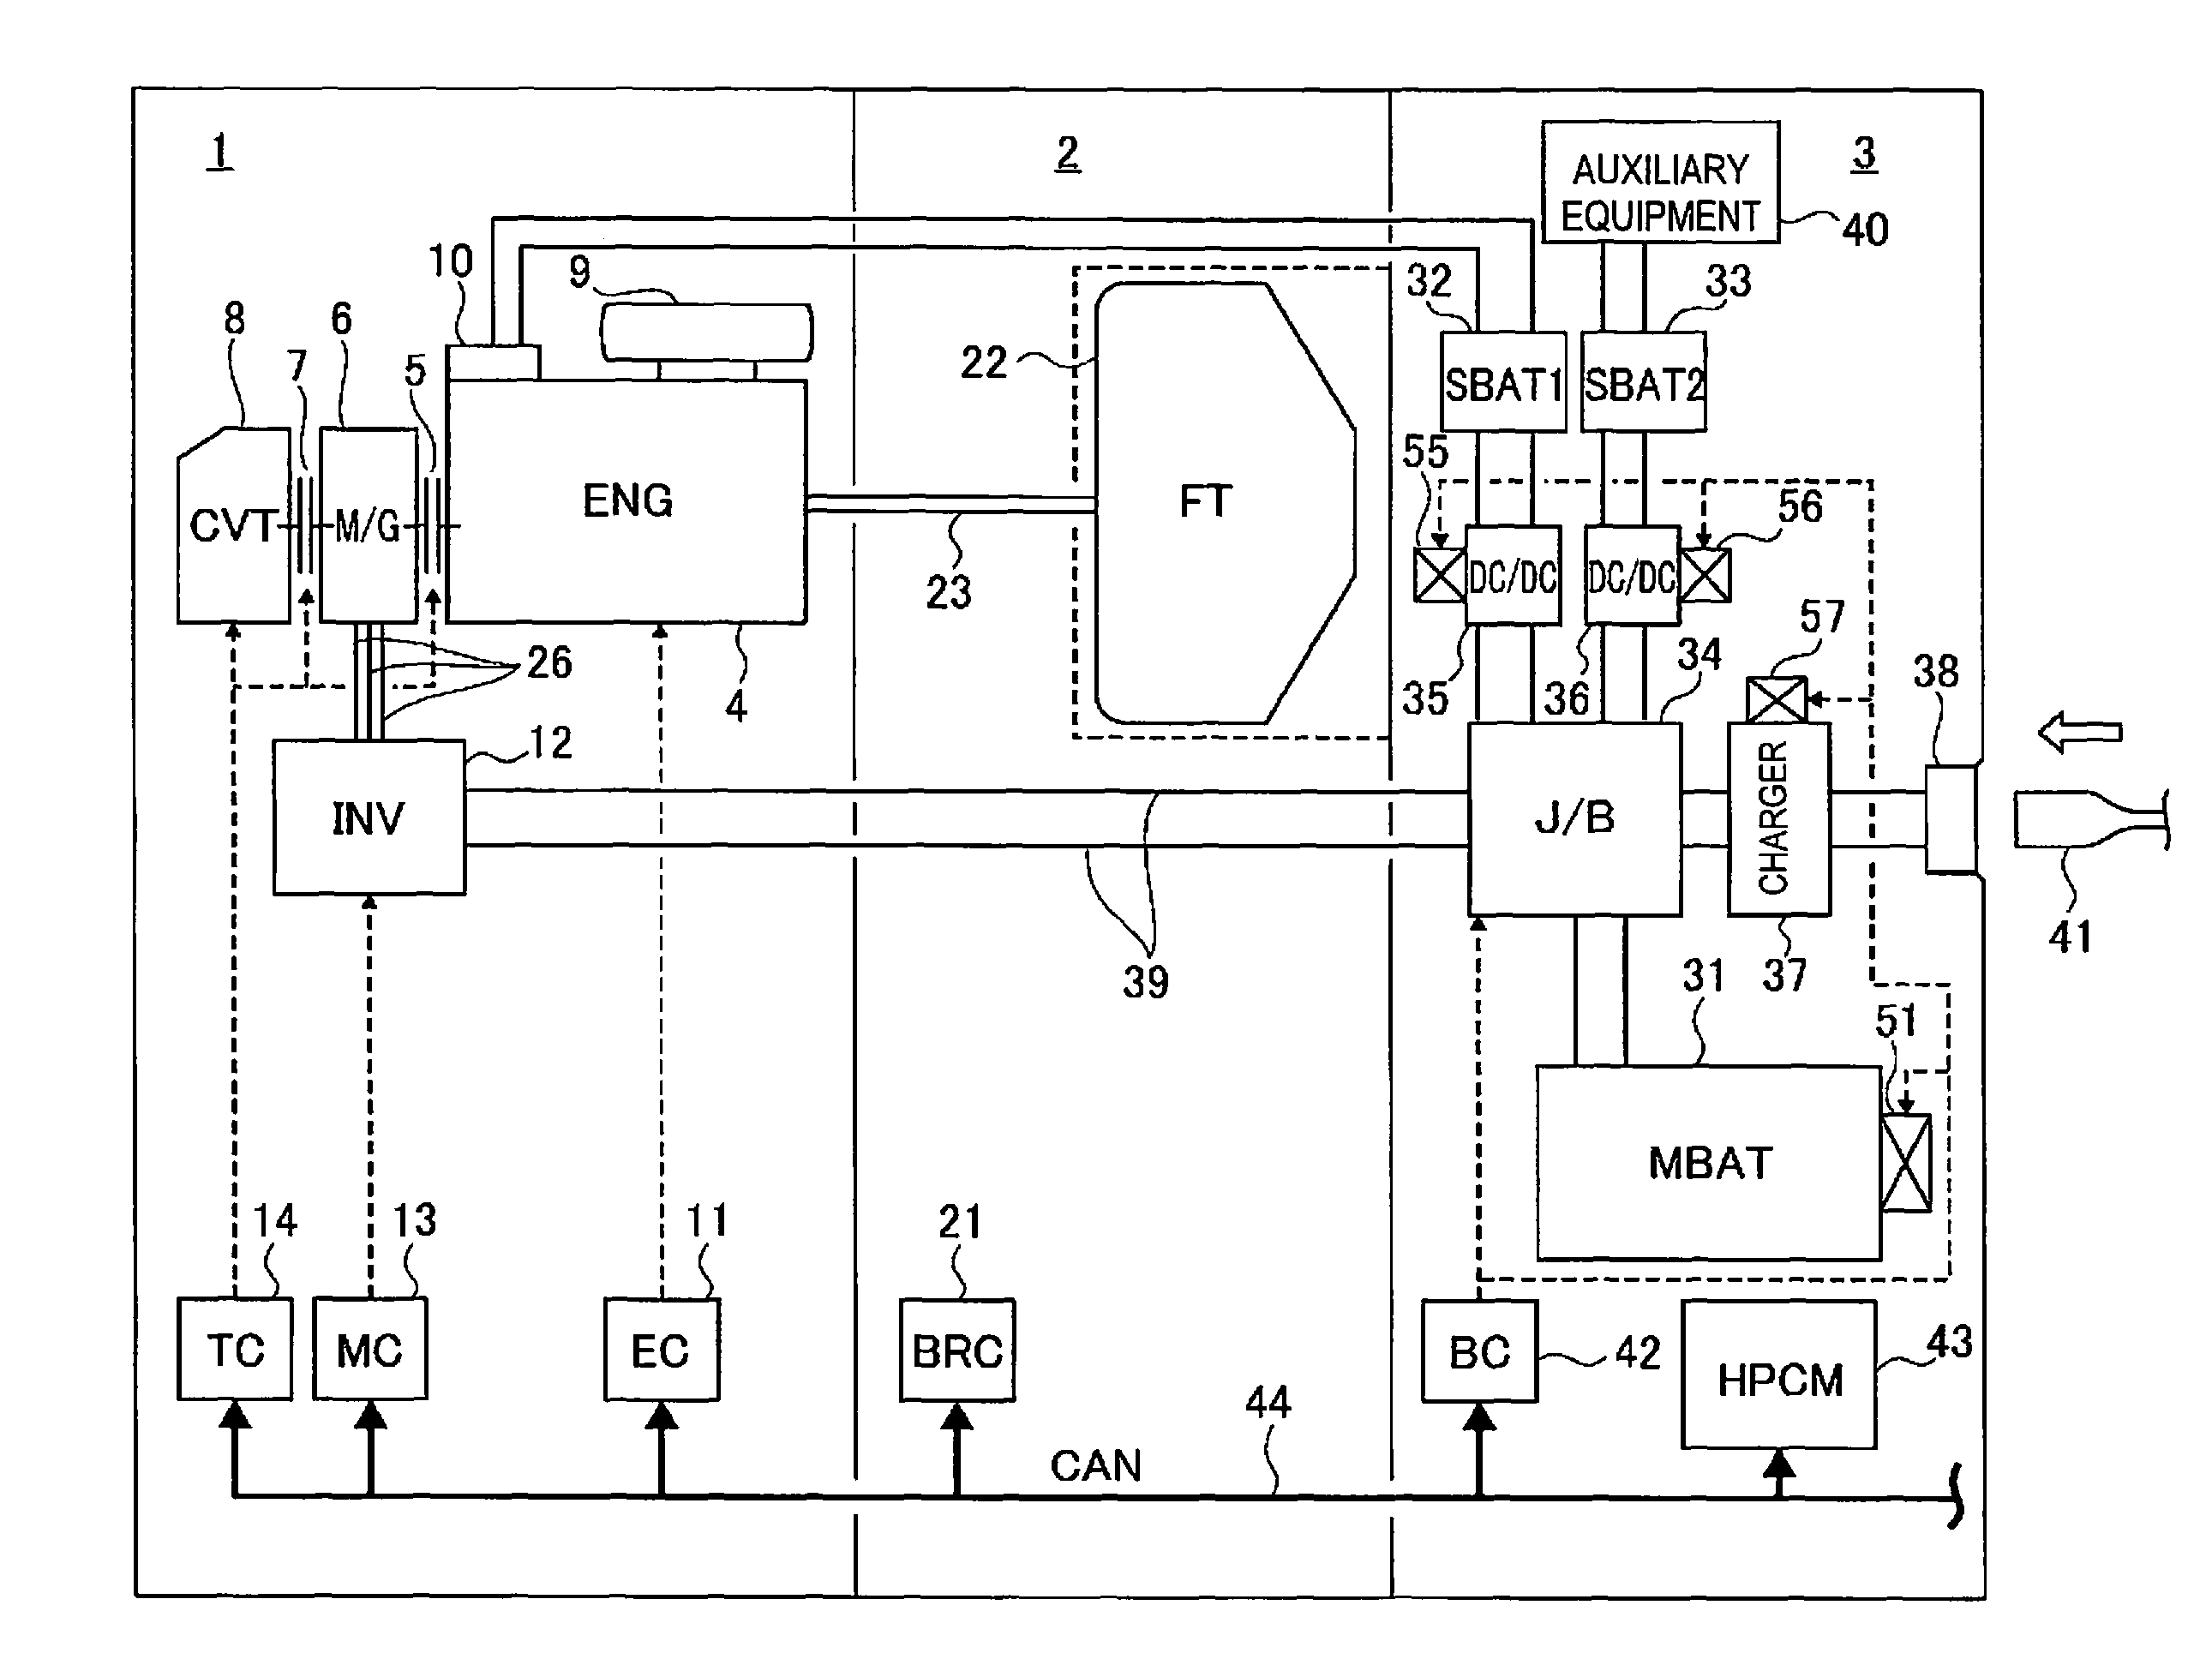 Battery system component layout structure for electrically driven vehicle